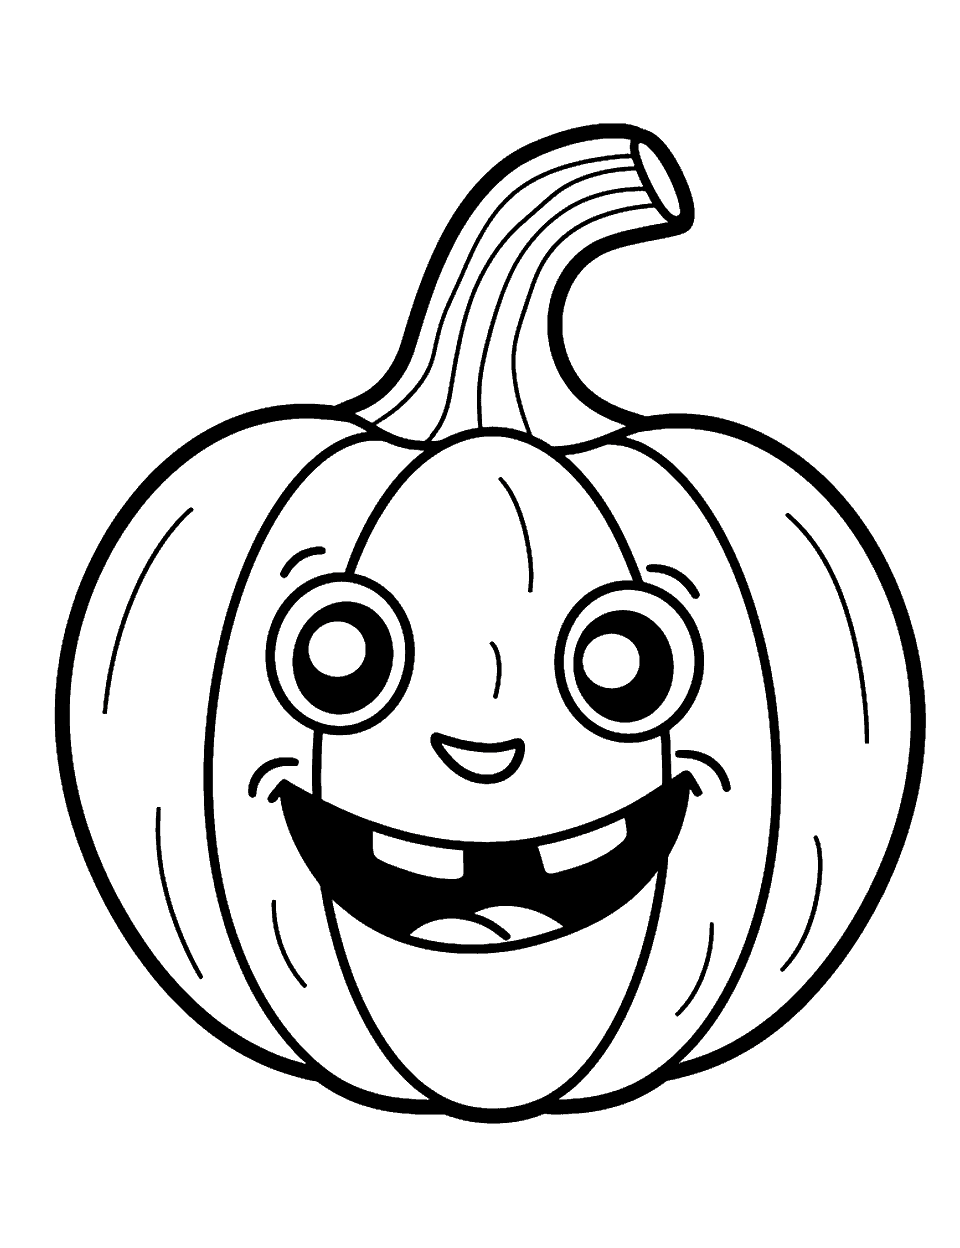 Pumpkin Carved Toddler Coloring Page - A pumpkin carved with a simple, happy face for Halloween.